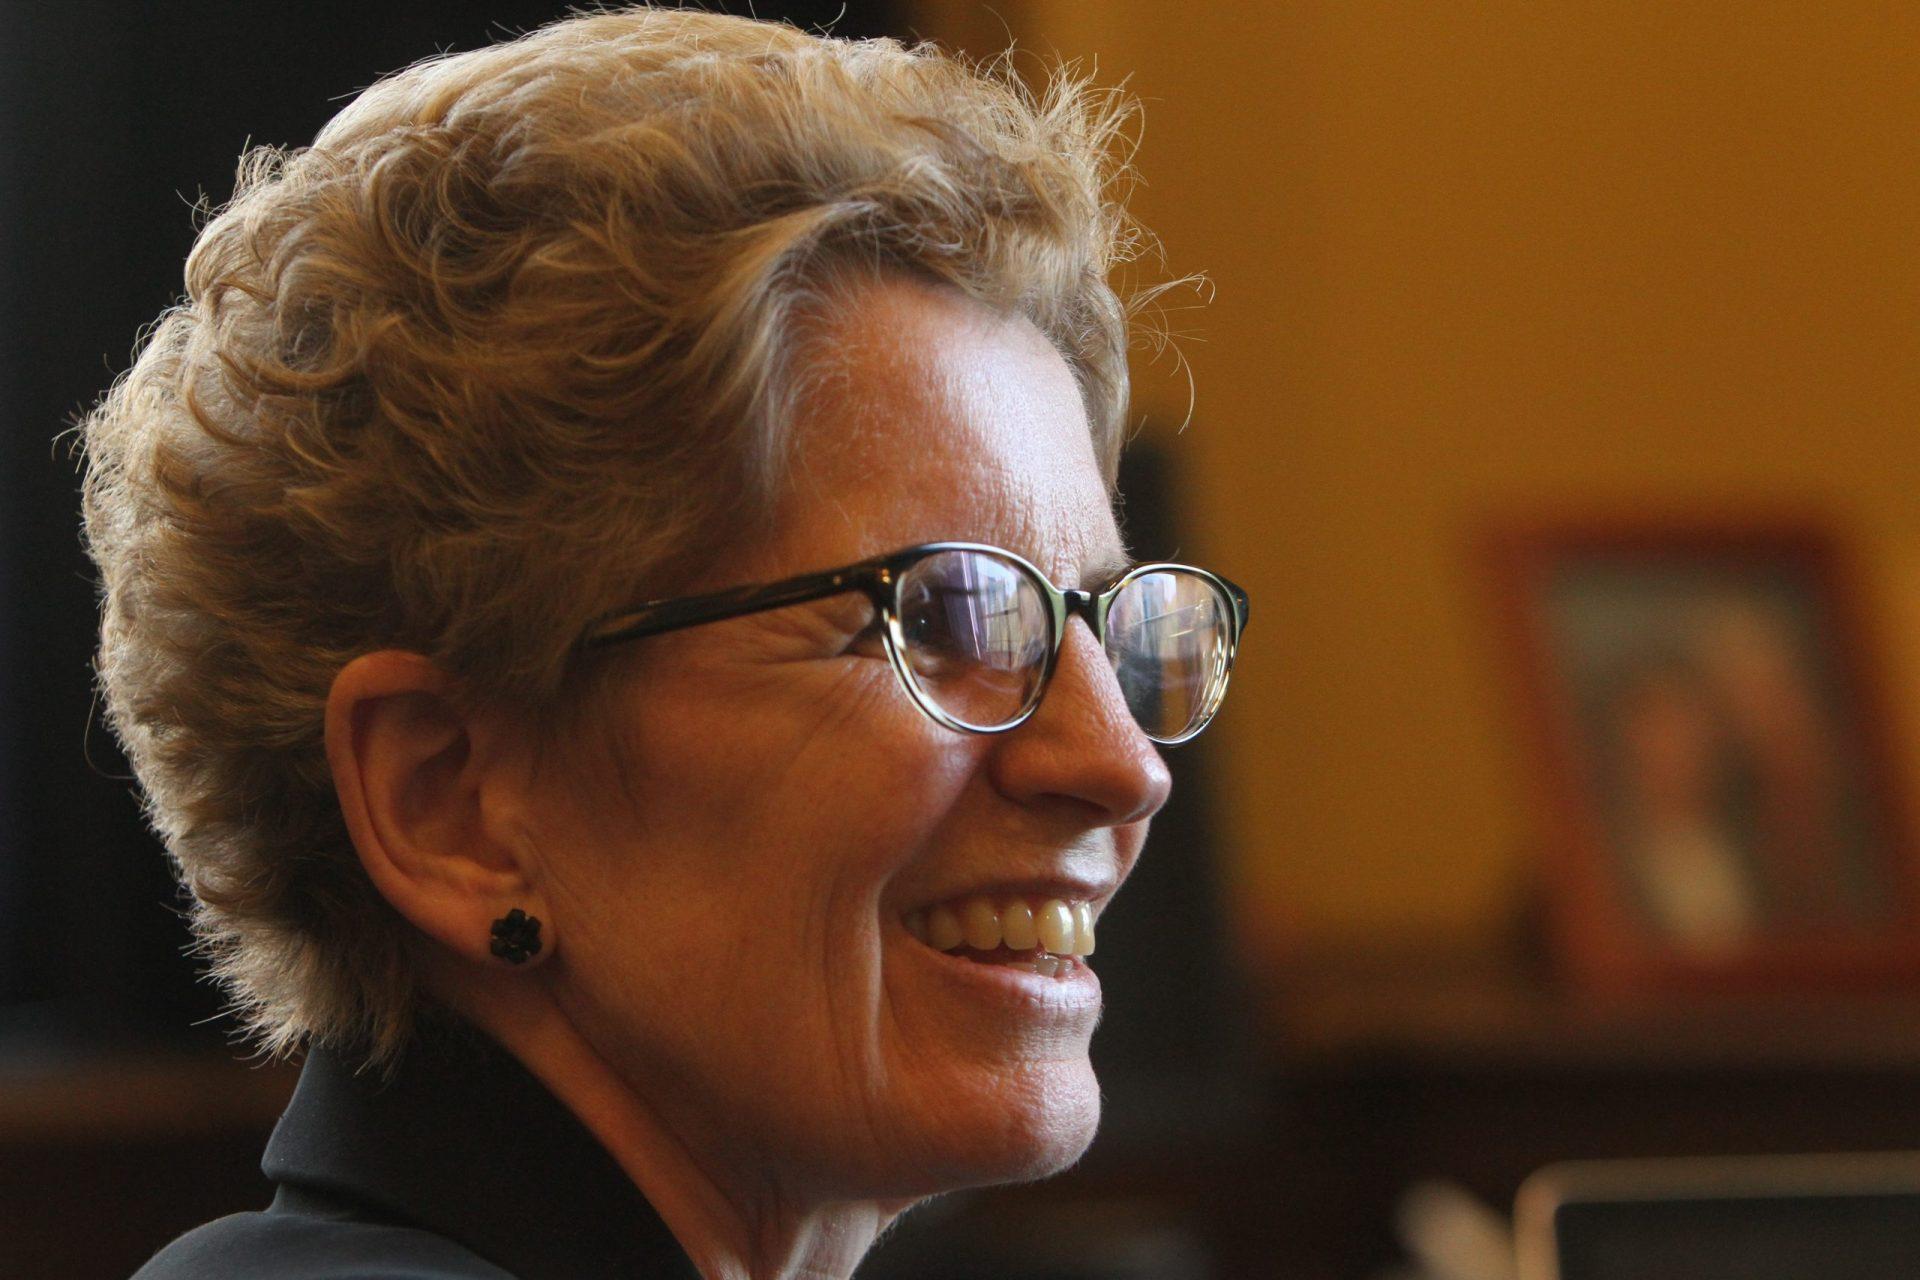 White woman with glasses in profile, smiling